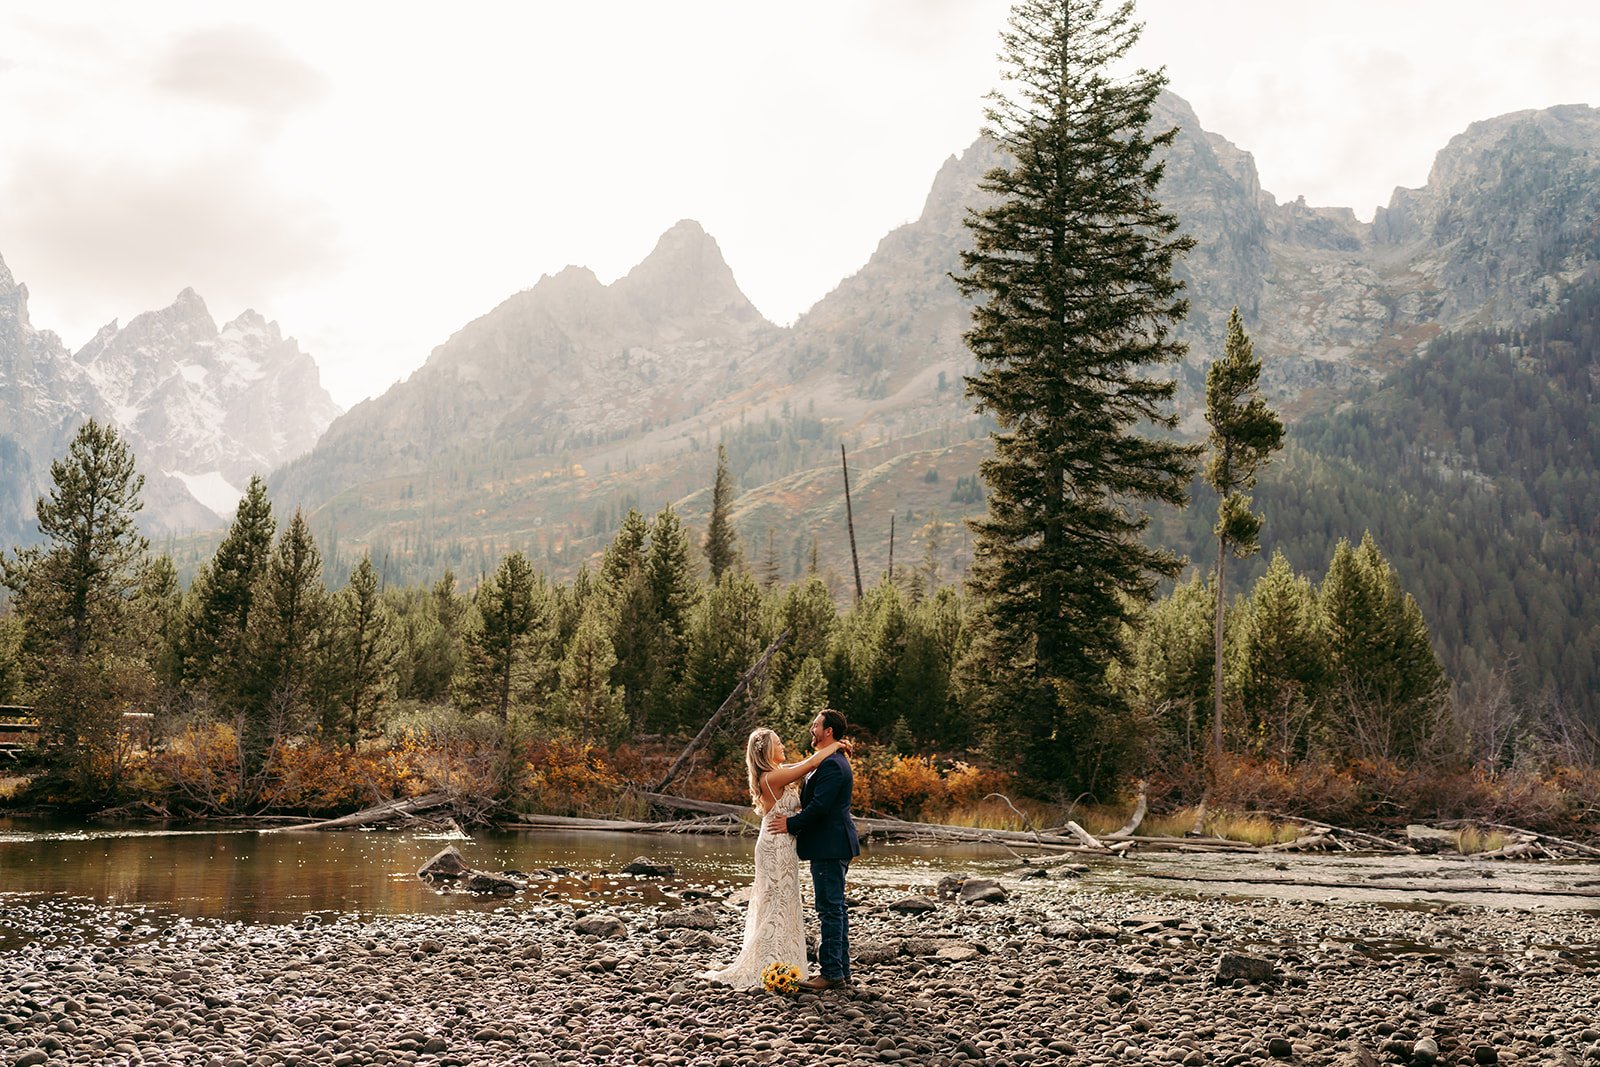 Why Should GTNP Should Be on Your Short List of Elopement Locations